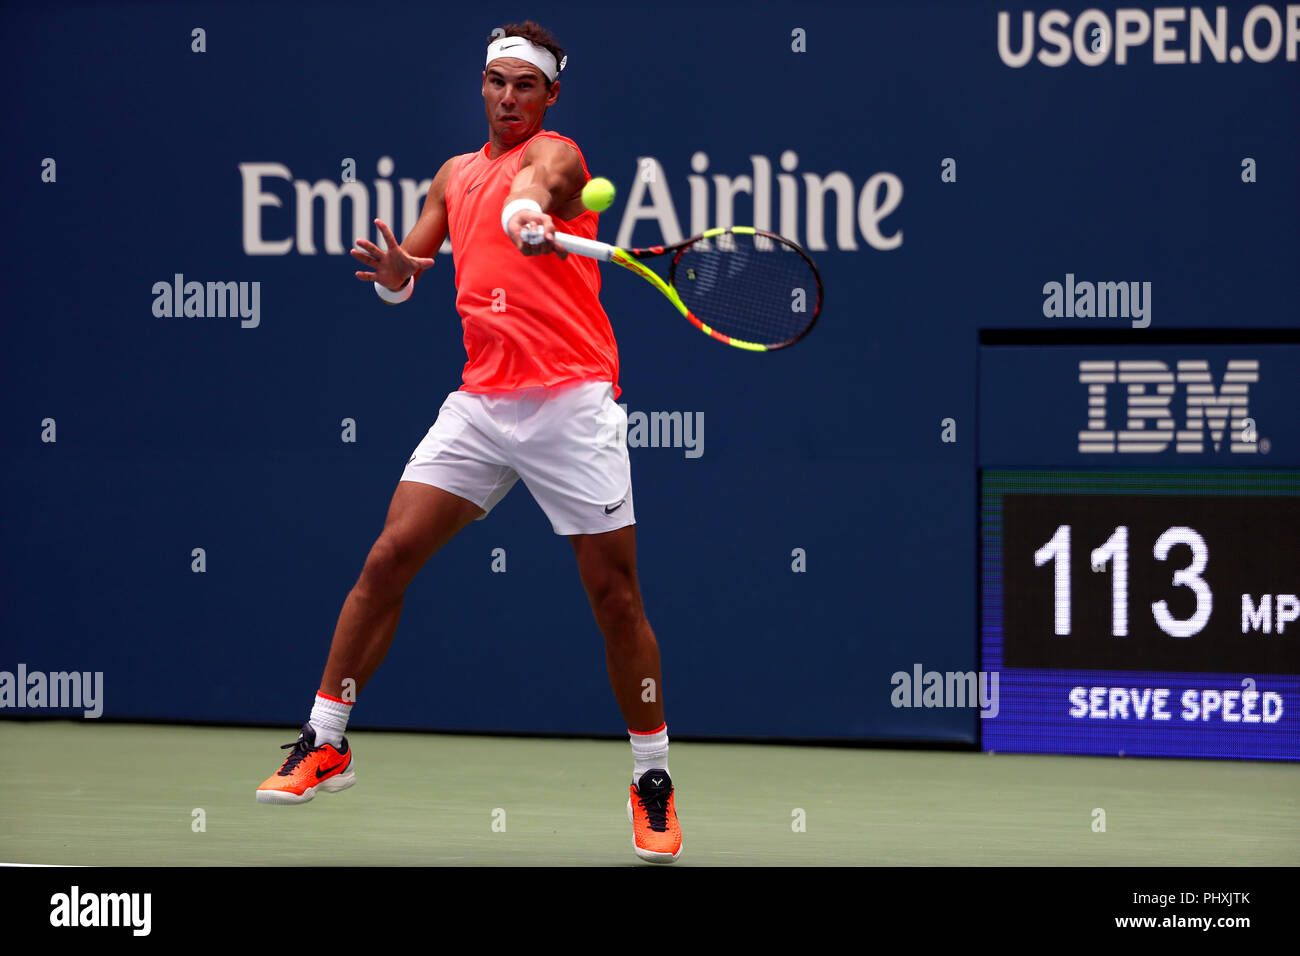 Nadal Return Of Serve High Resolution Stock Photography and Images - Alamy